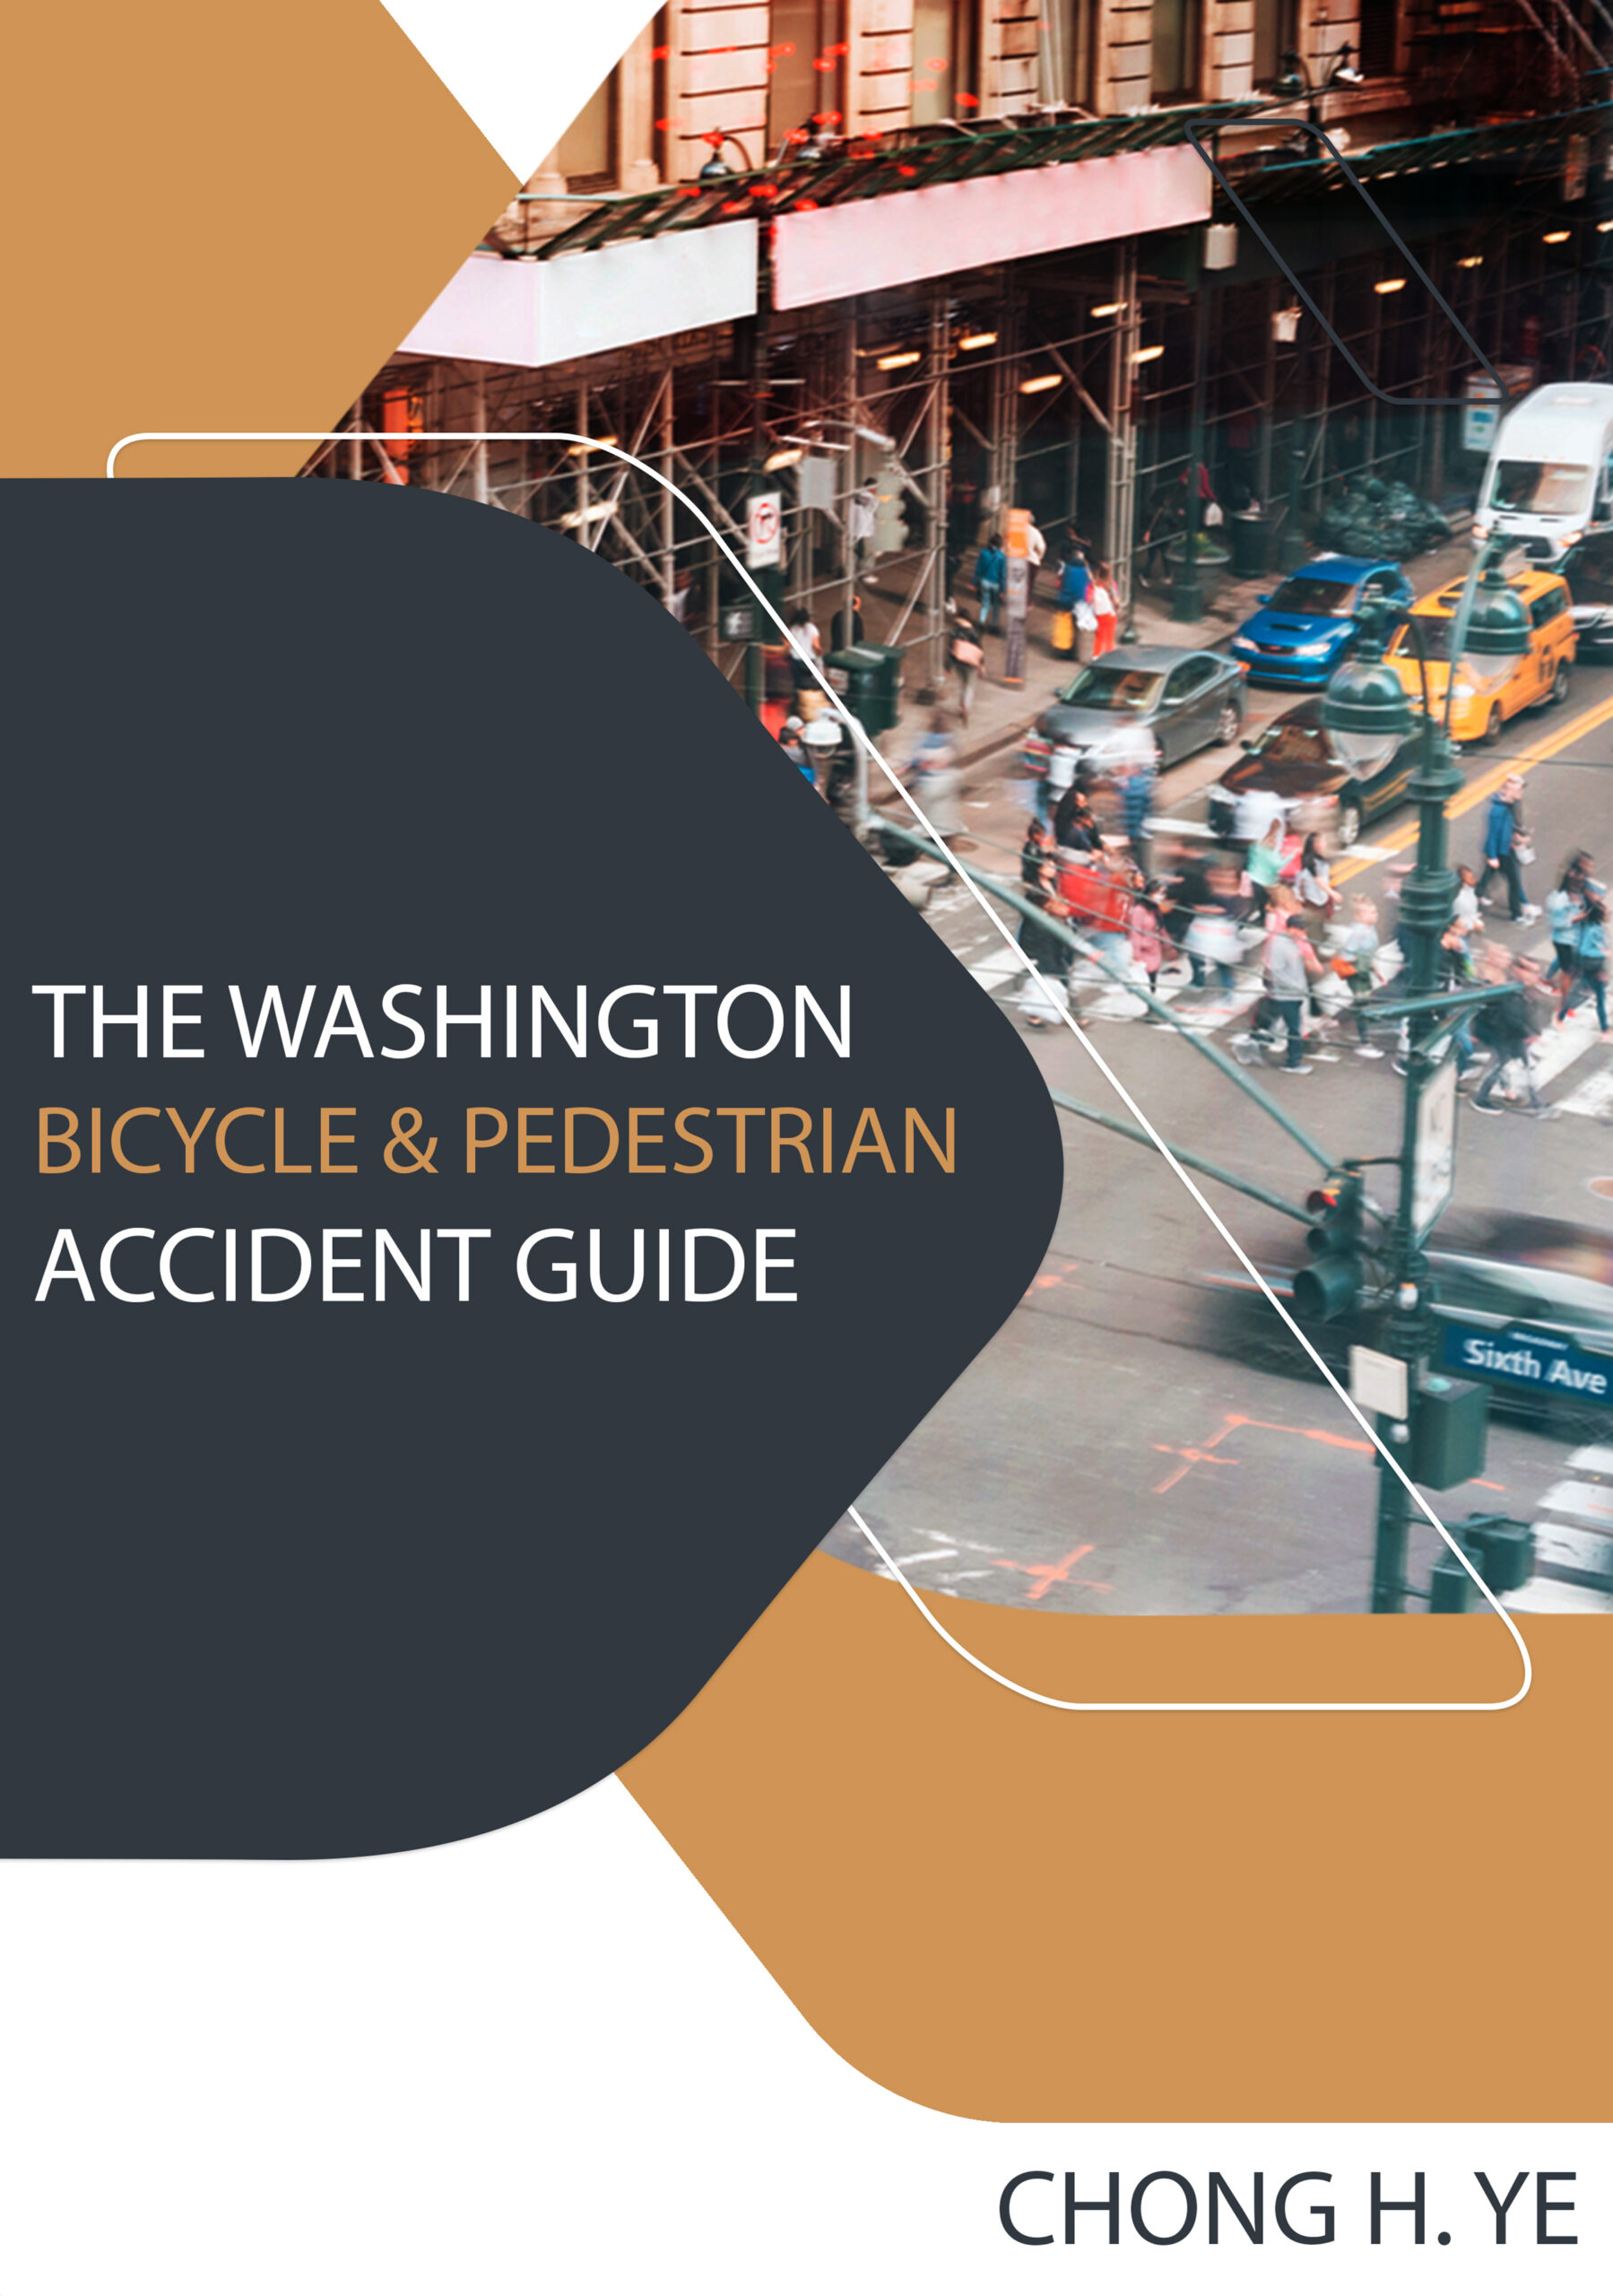 The Washington State Bicycle and Pedestrian Accident Guide